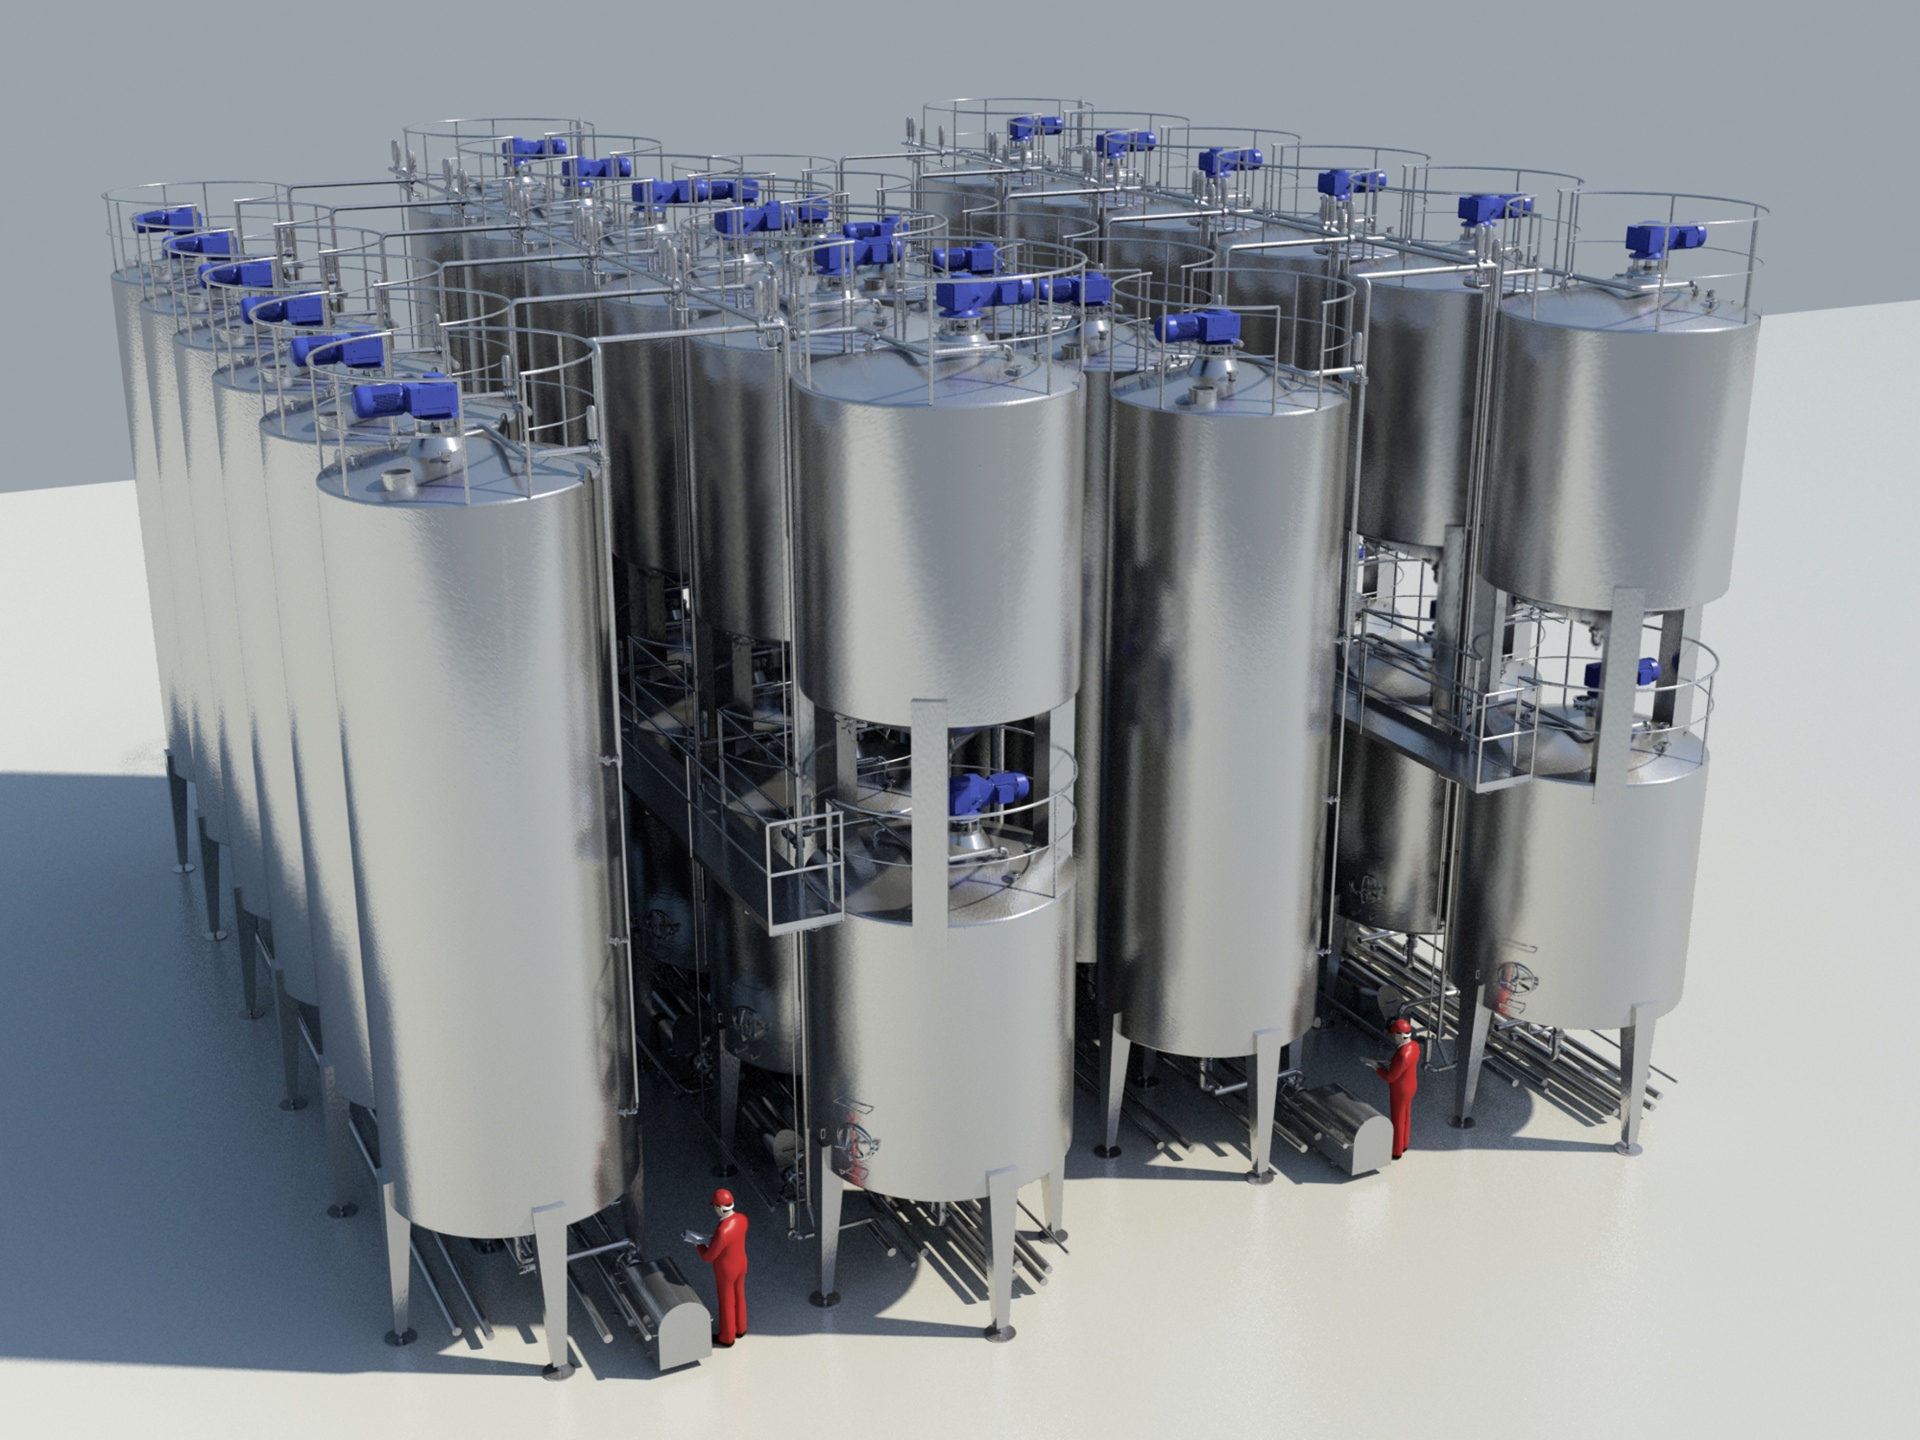 Tank farm with 4 rows of tanks with agitators, 3D drawing